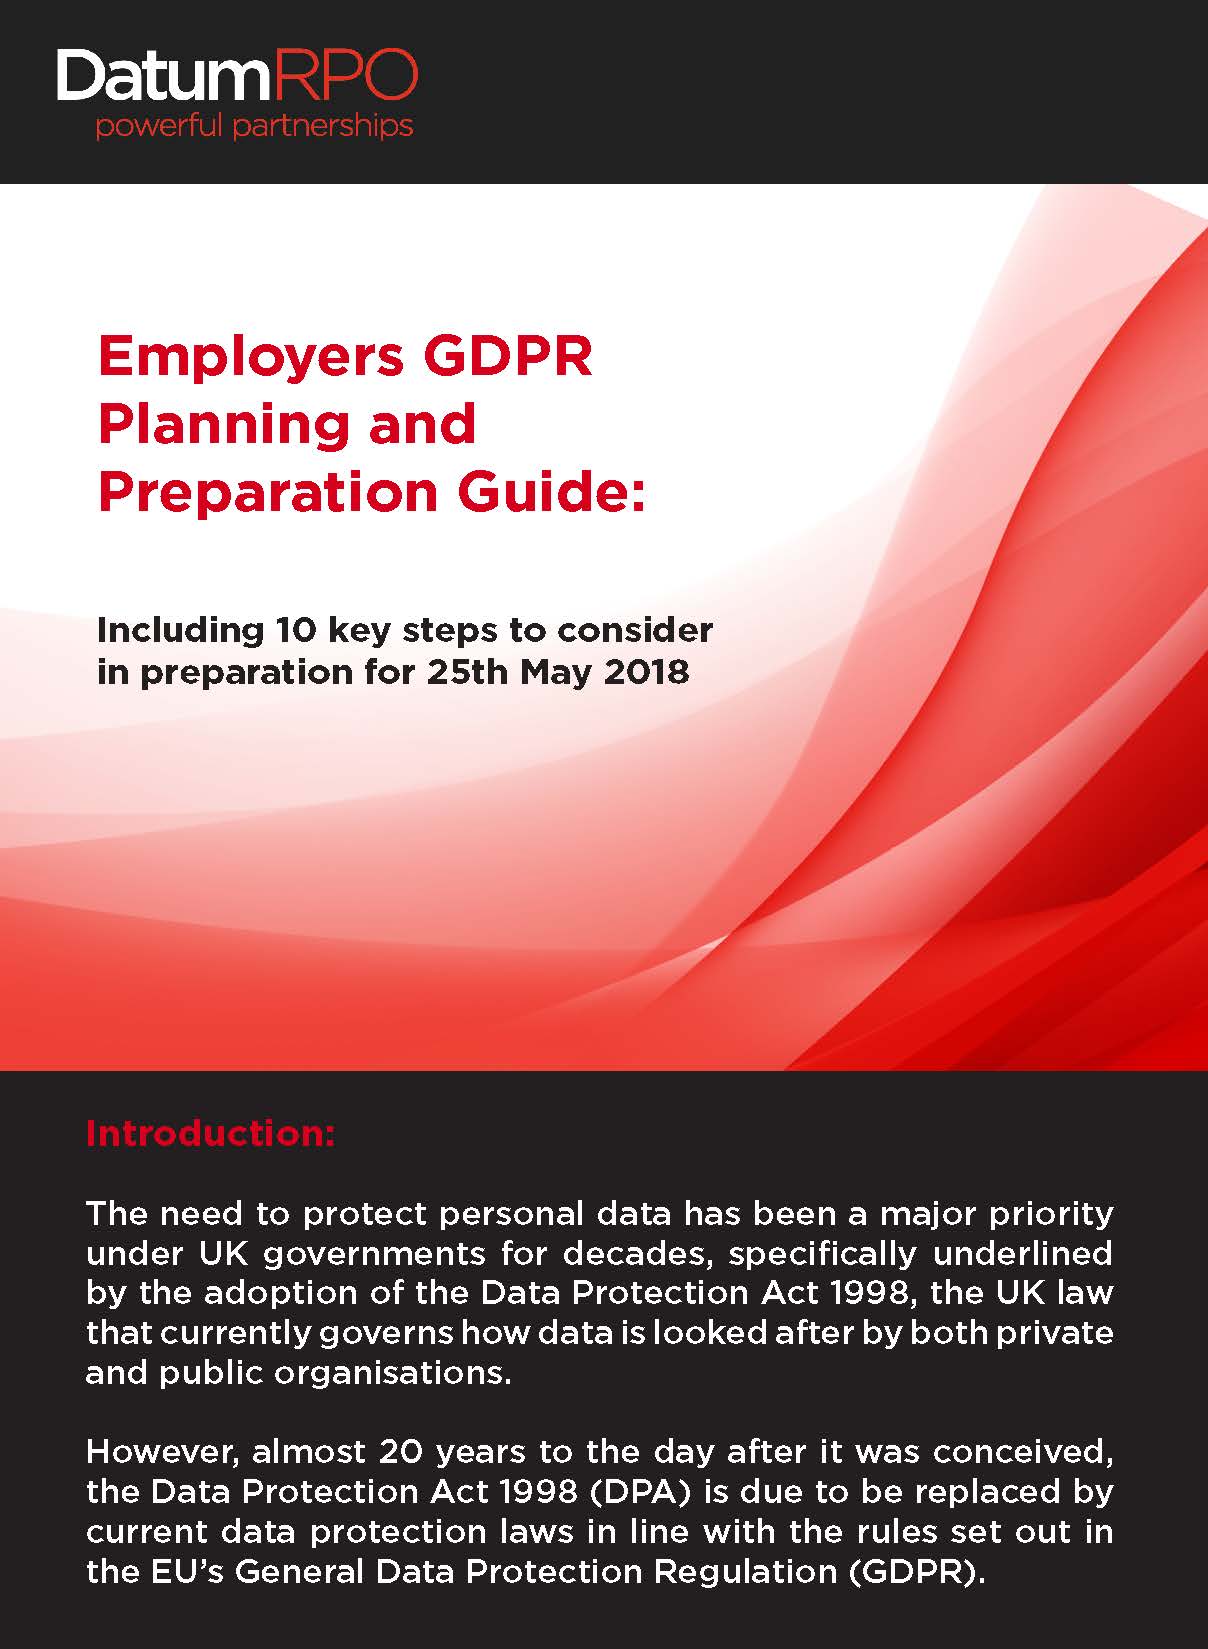 Download your Employers GDPR Planning and Preparation Guide